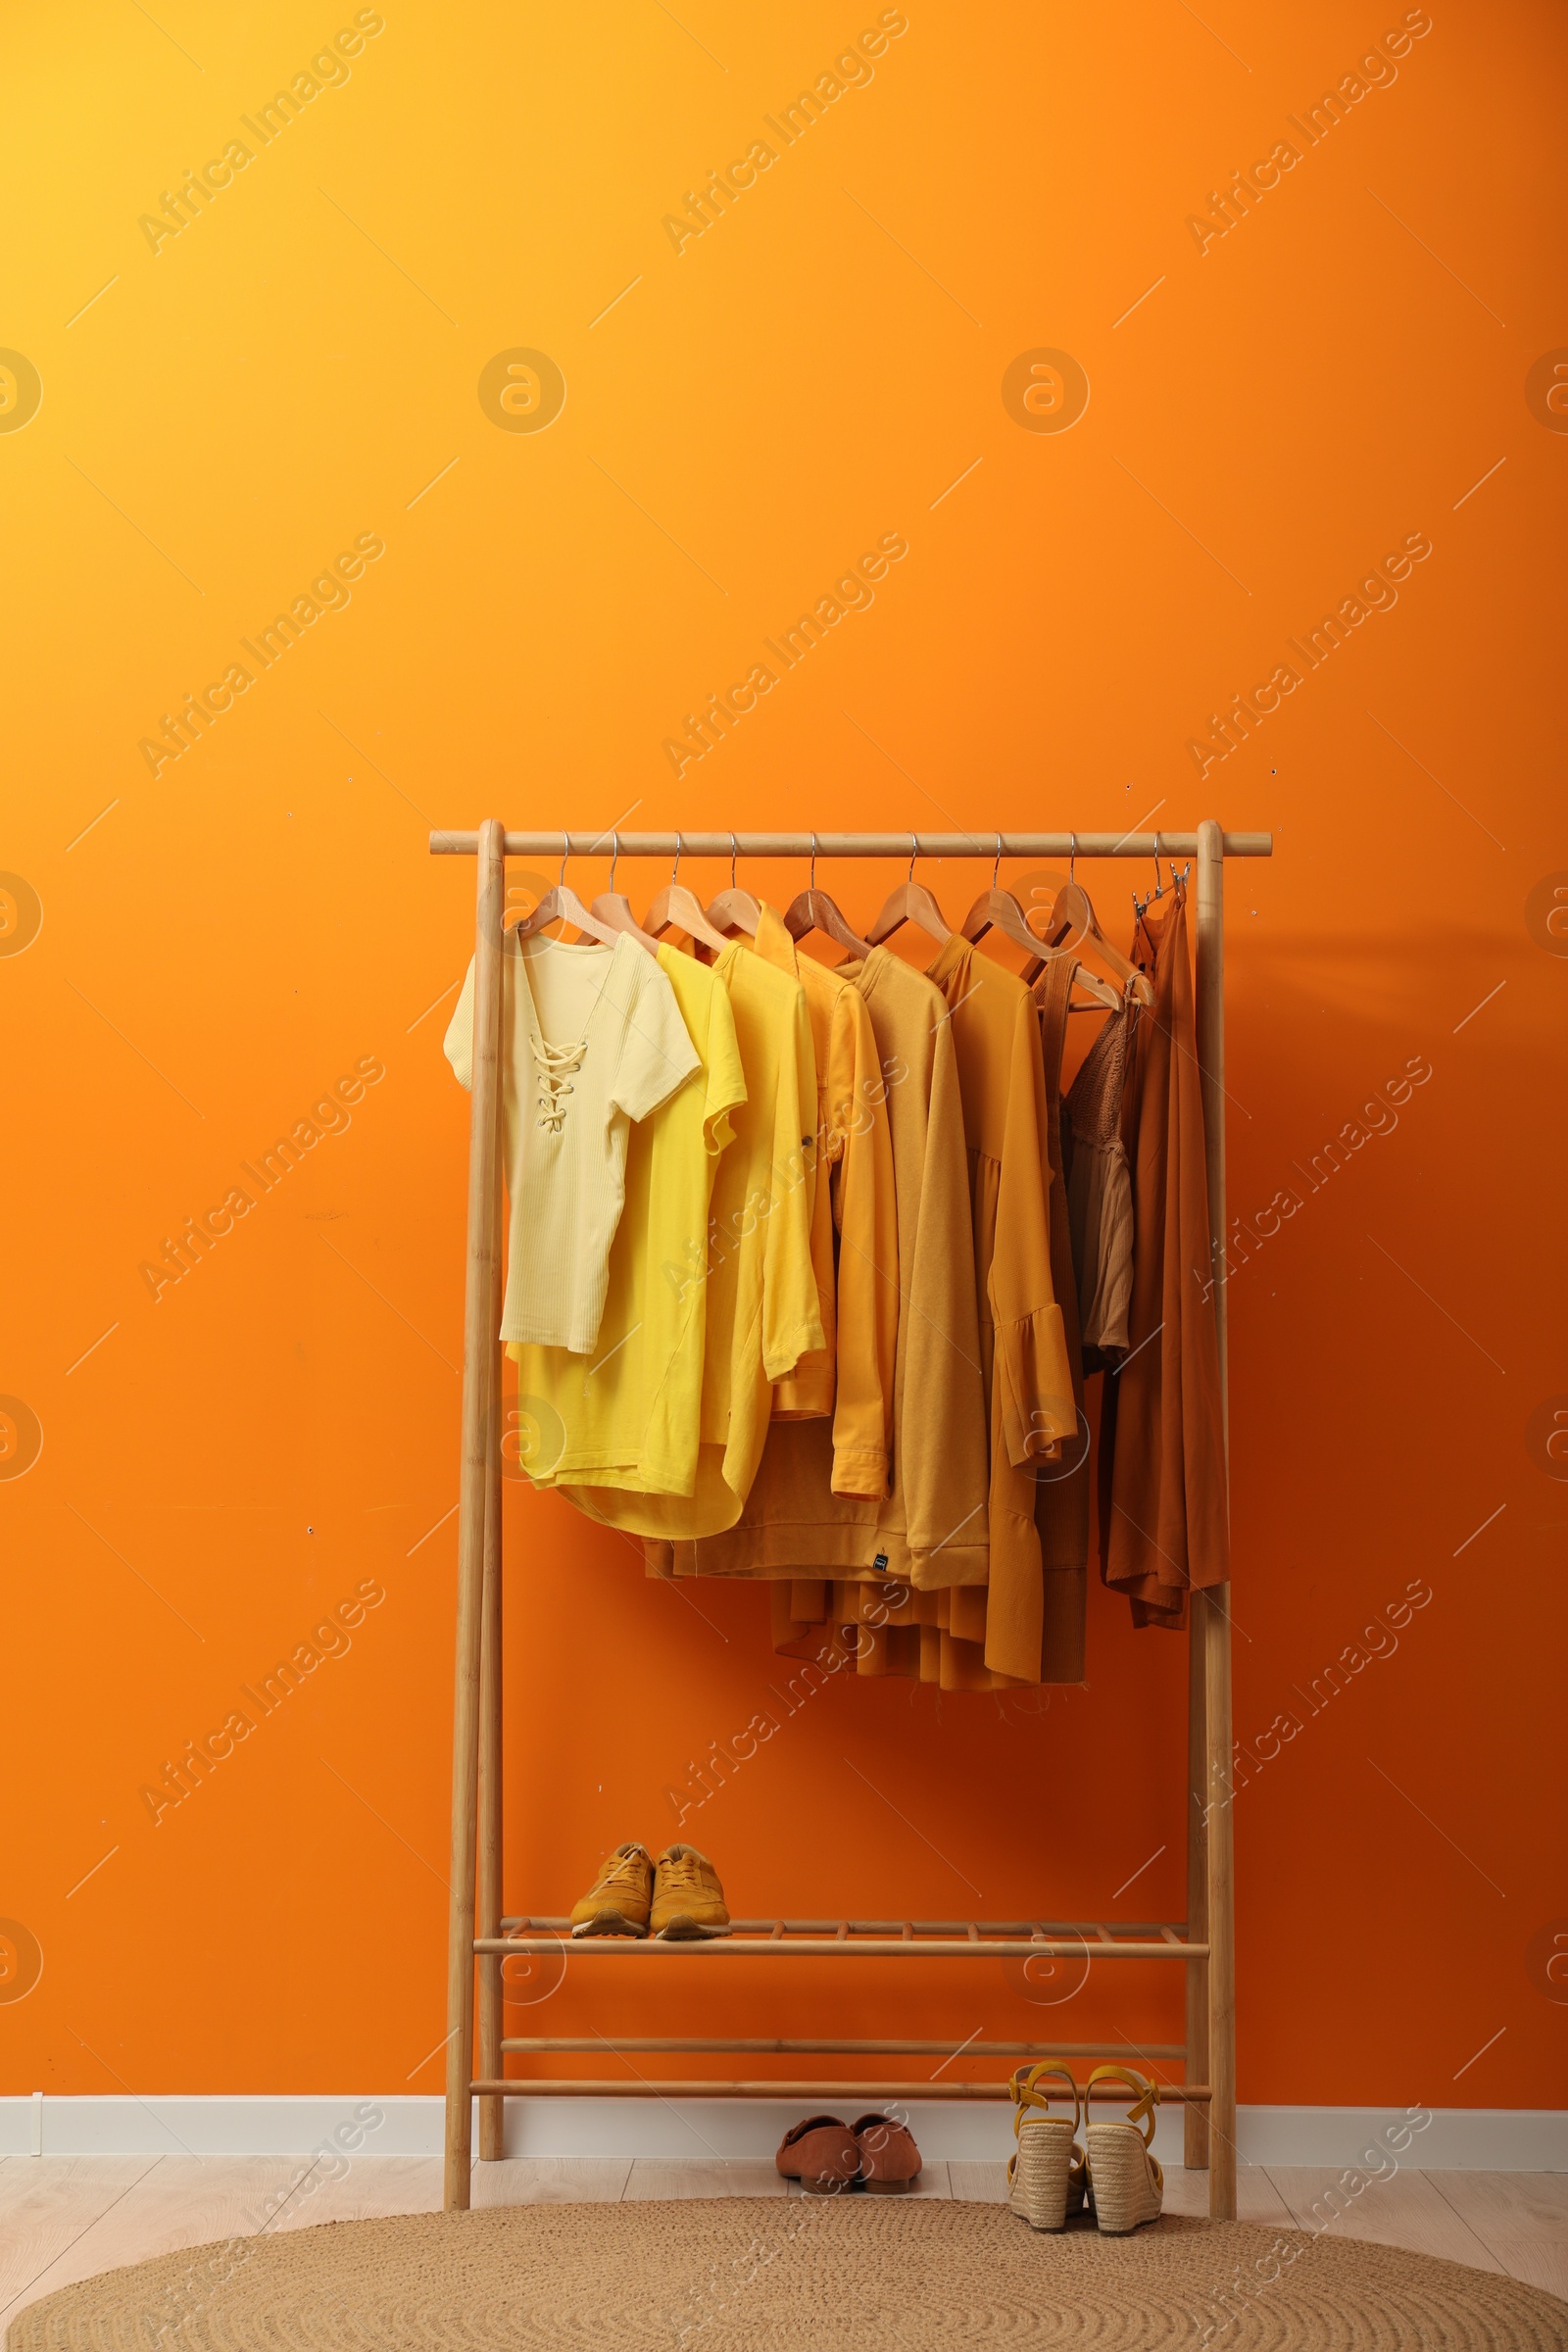 Photo of Rack with different stylish women`s clothes and shoes near orange wall indoors